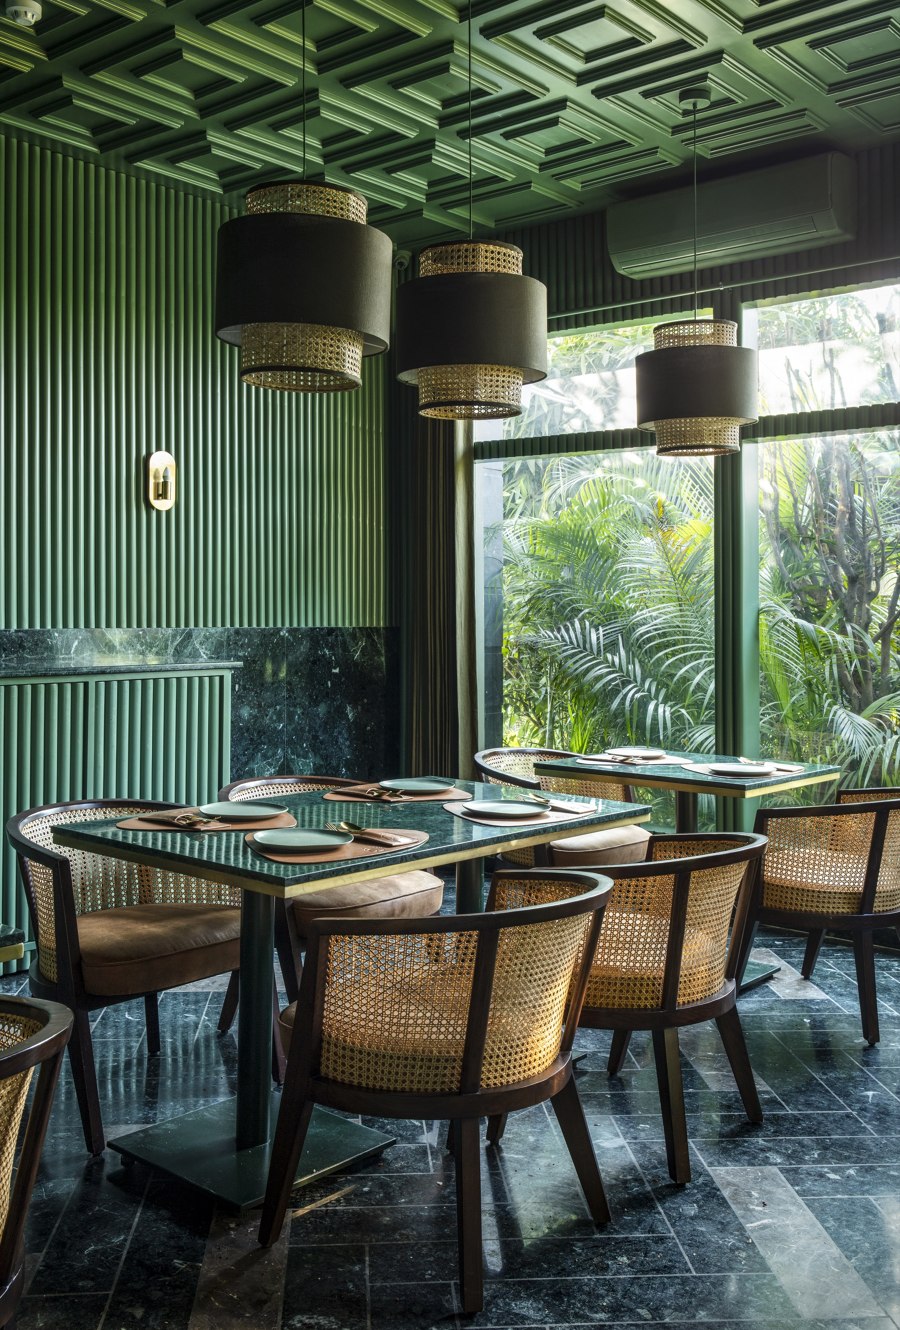 The Fluted Emerald Elgin Cafe by Renesa Architecture Design Interiors | Café interiors